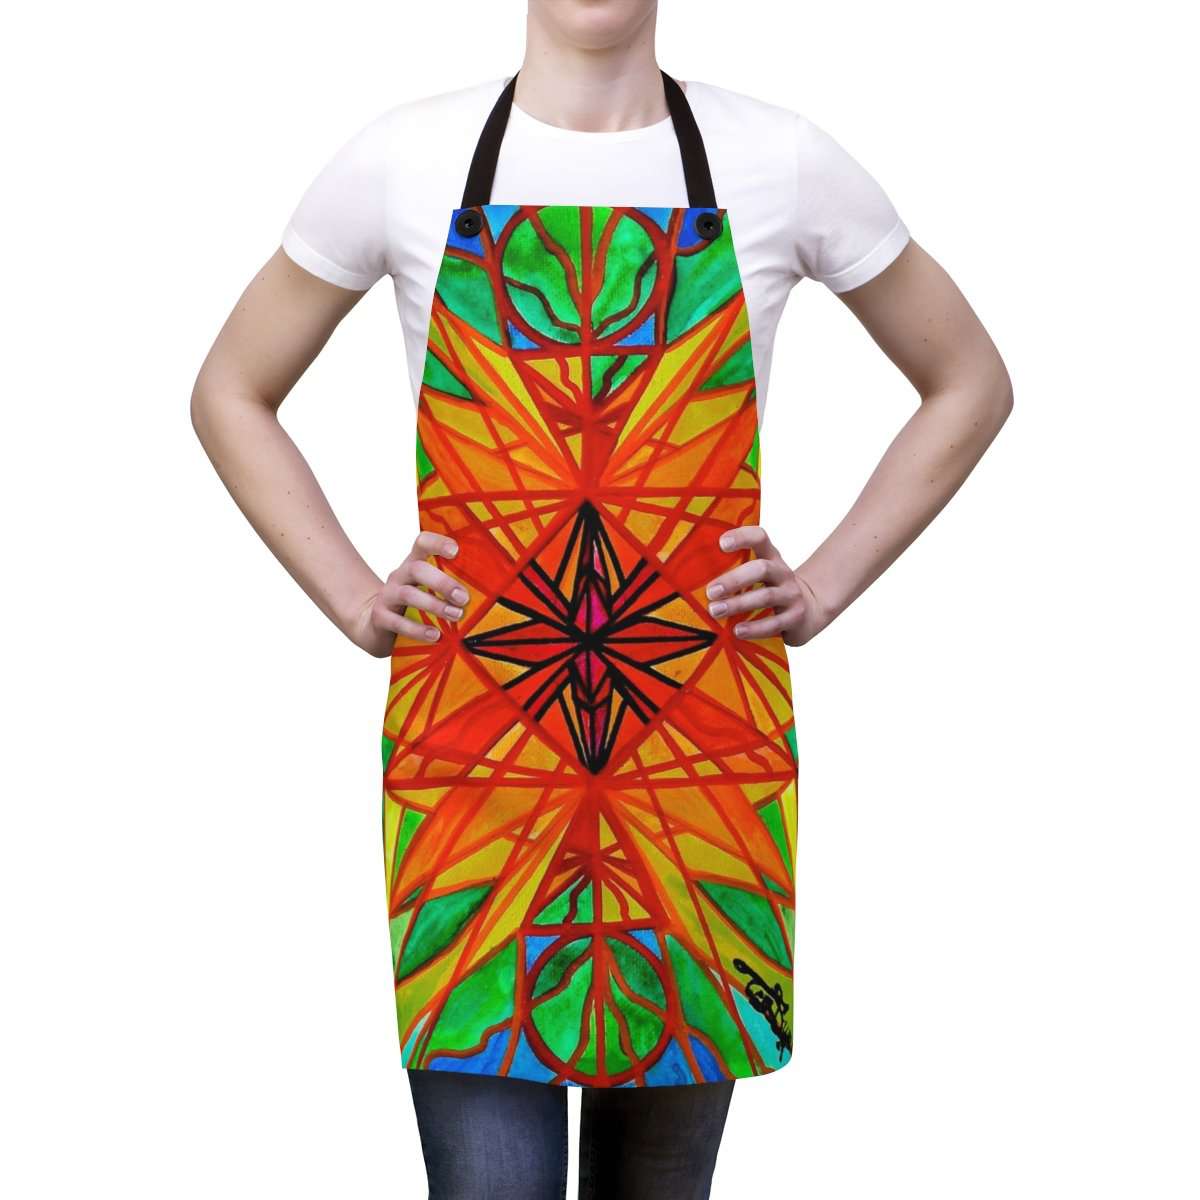 the-authentic-online-store-of-self-liberate-apron-online-now_0.jpg